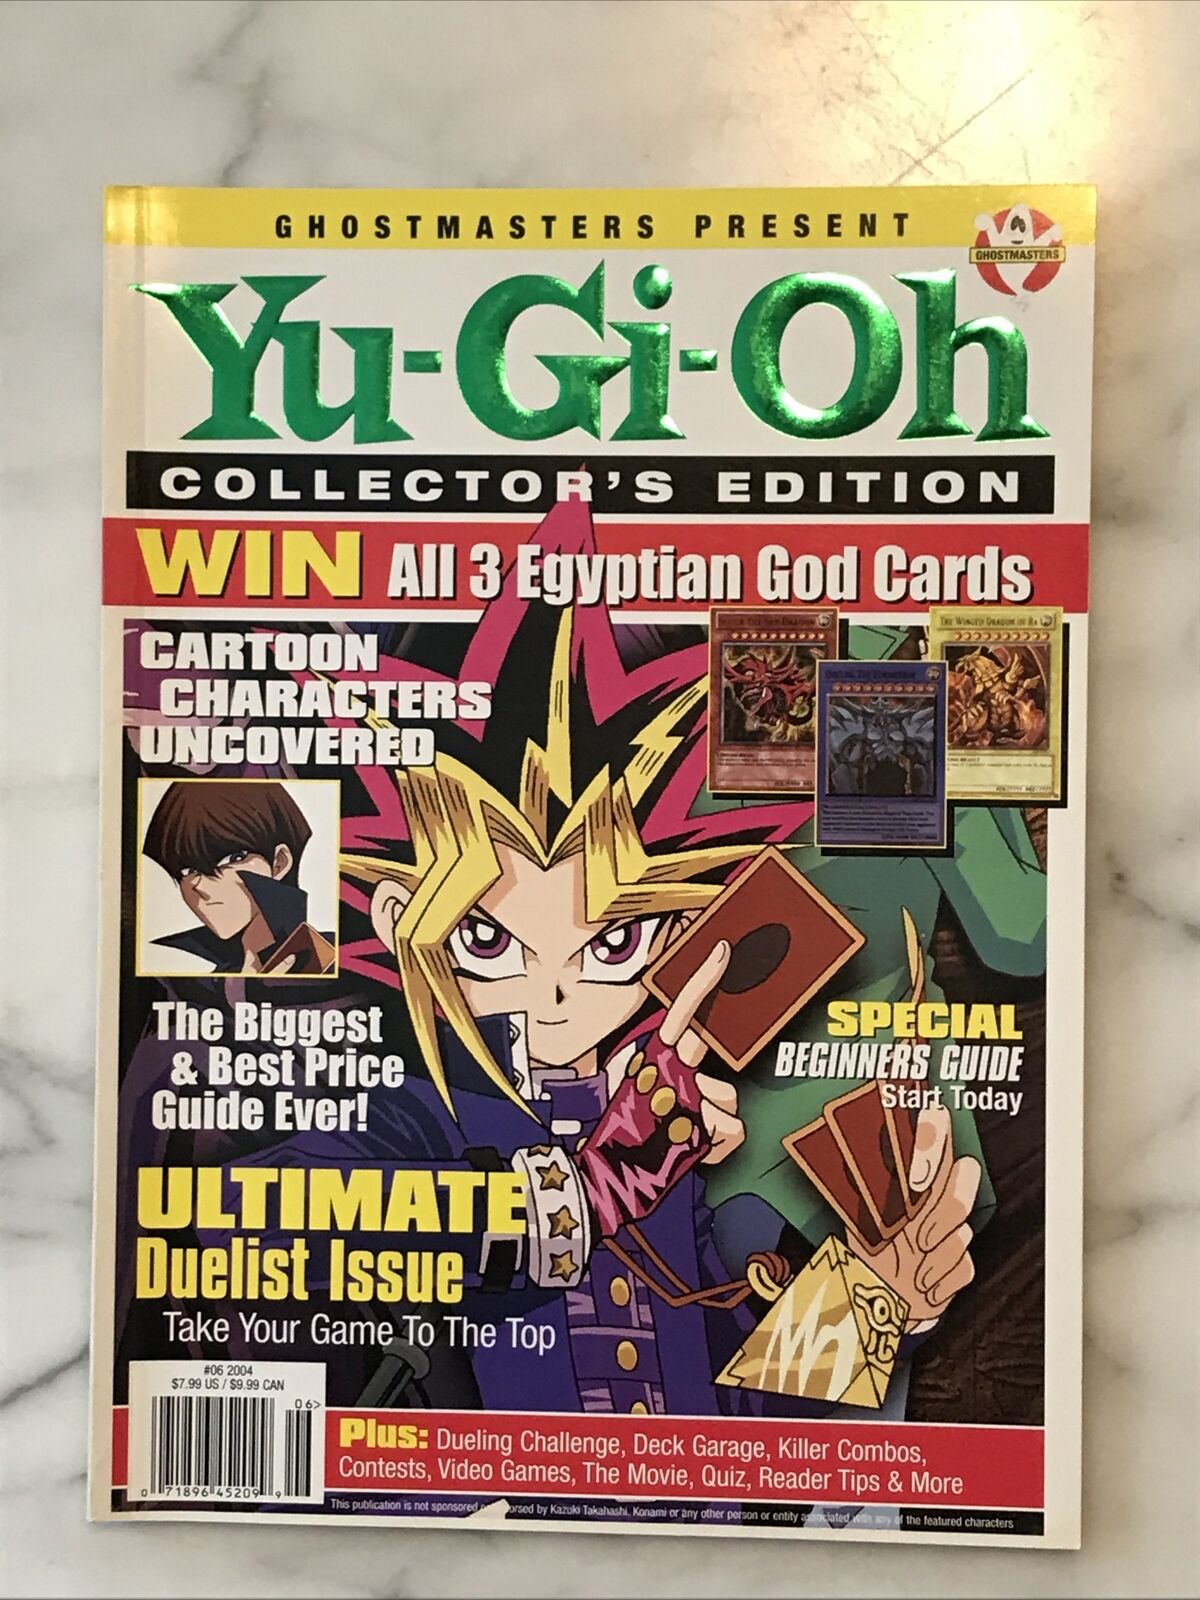 Ghostmasters Present Yu-Gi-Oh Collectors Edition Magazine 2004 #6 VG-EX (P104)